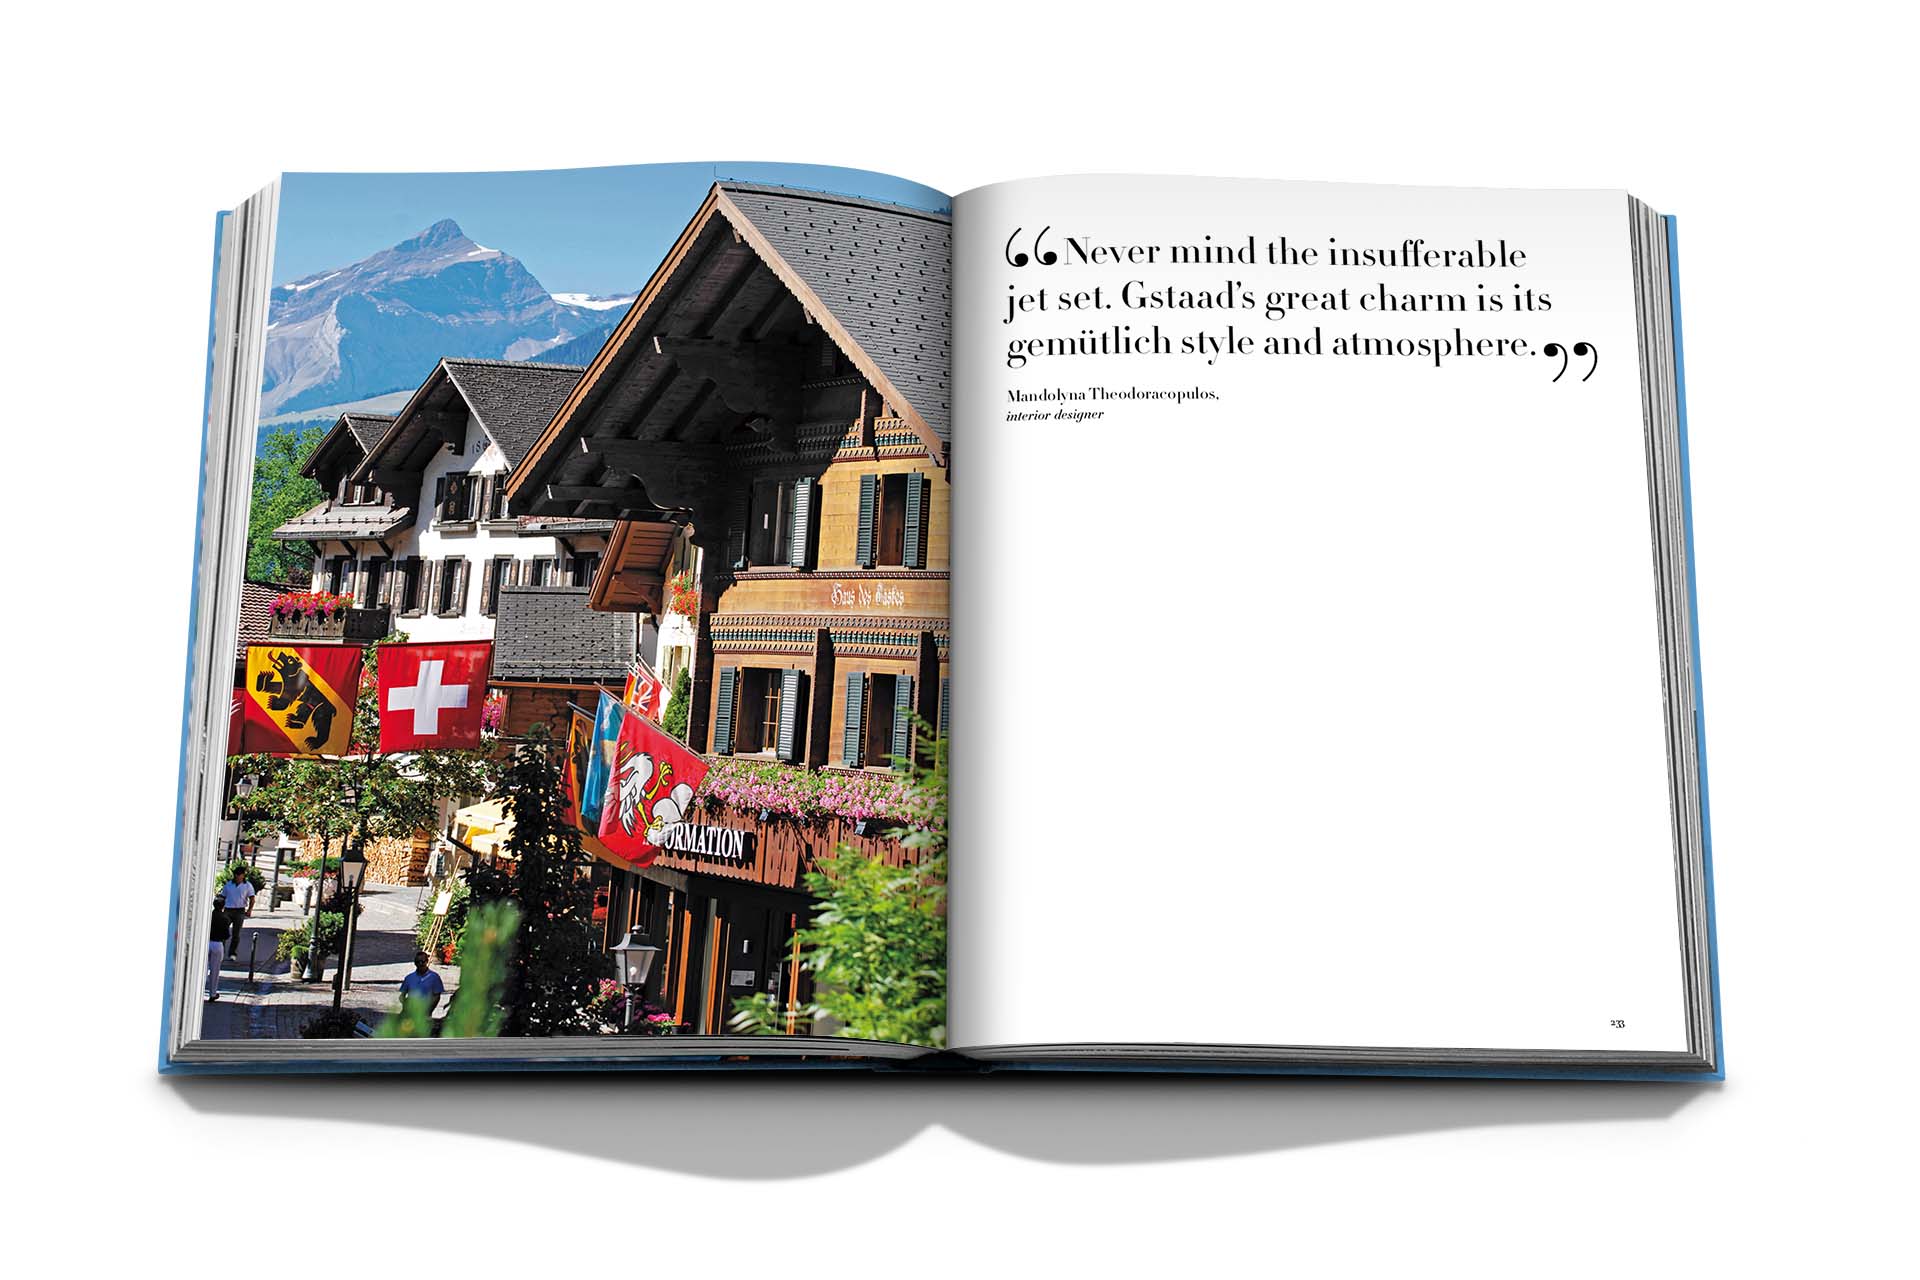 Buch Gstaad Glam